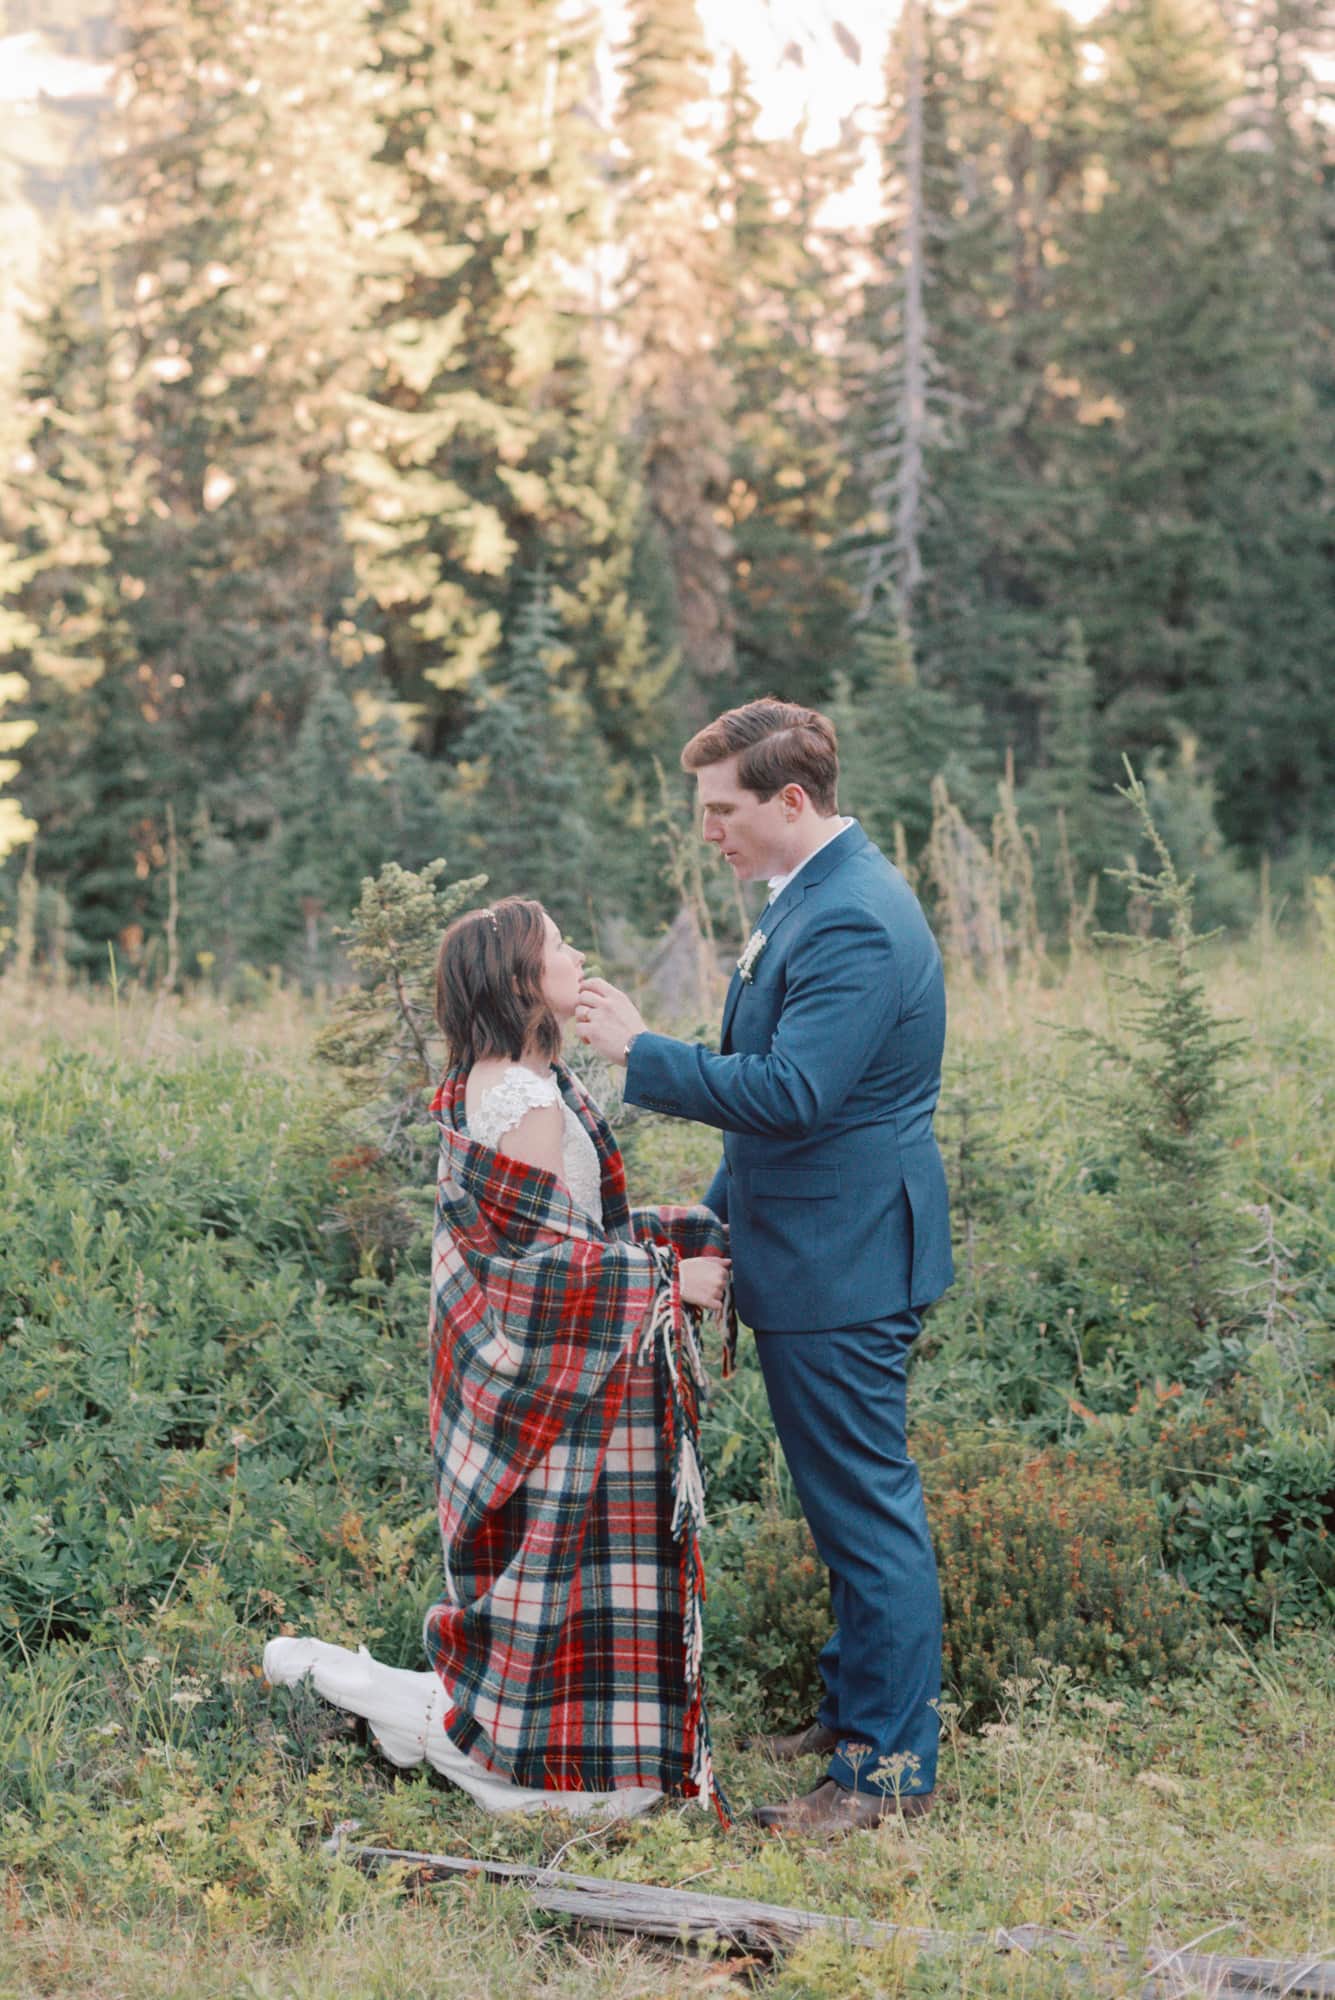 A bride wrapped in a red plaid blanket stands in a forest trail with her groom in a blue suit as he wipes something off her cheek